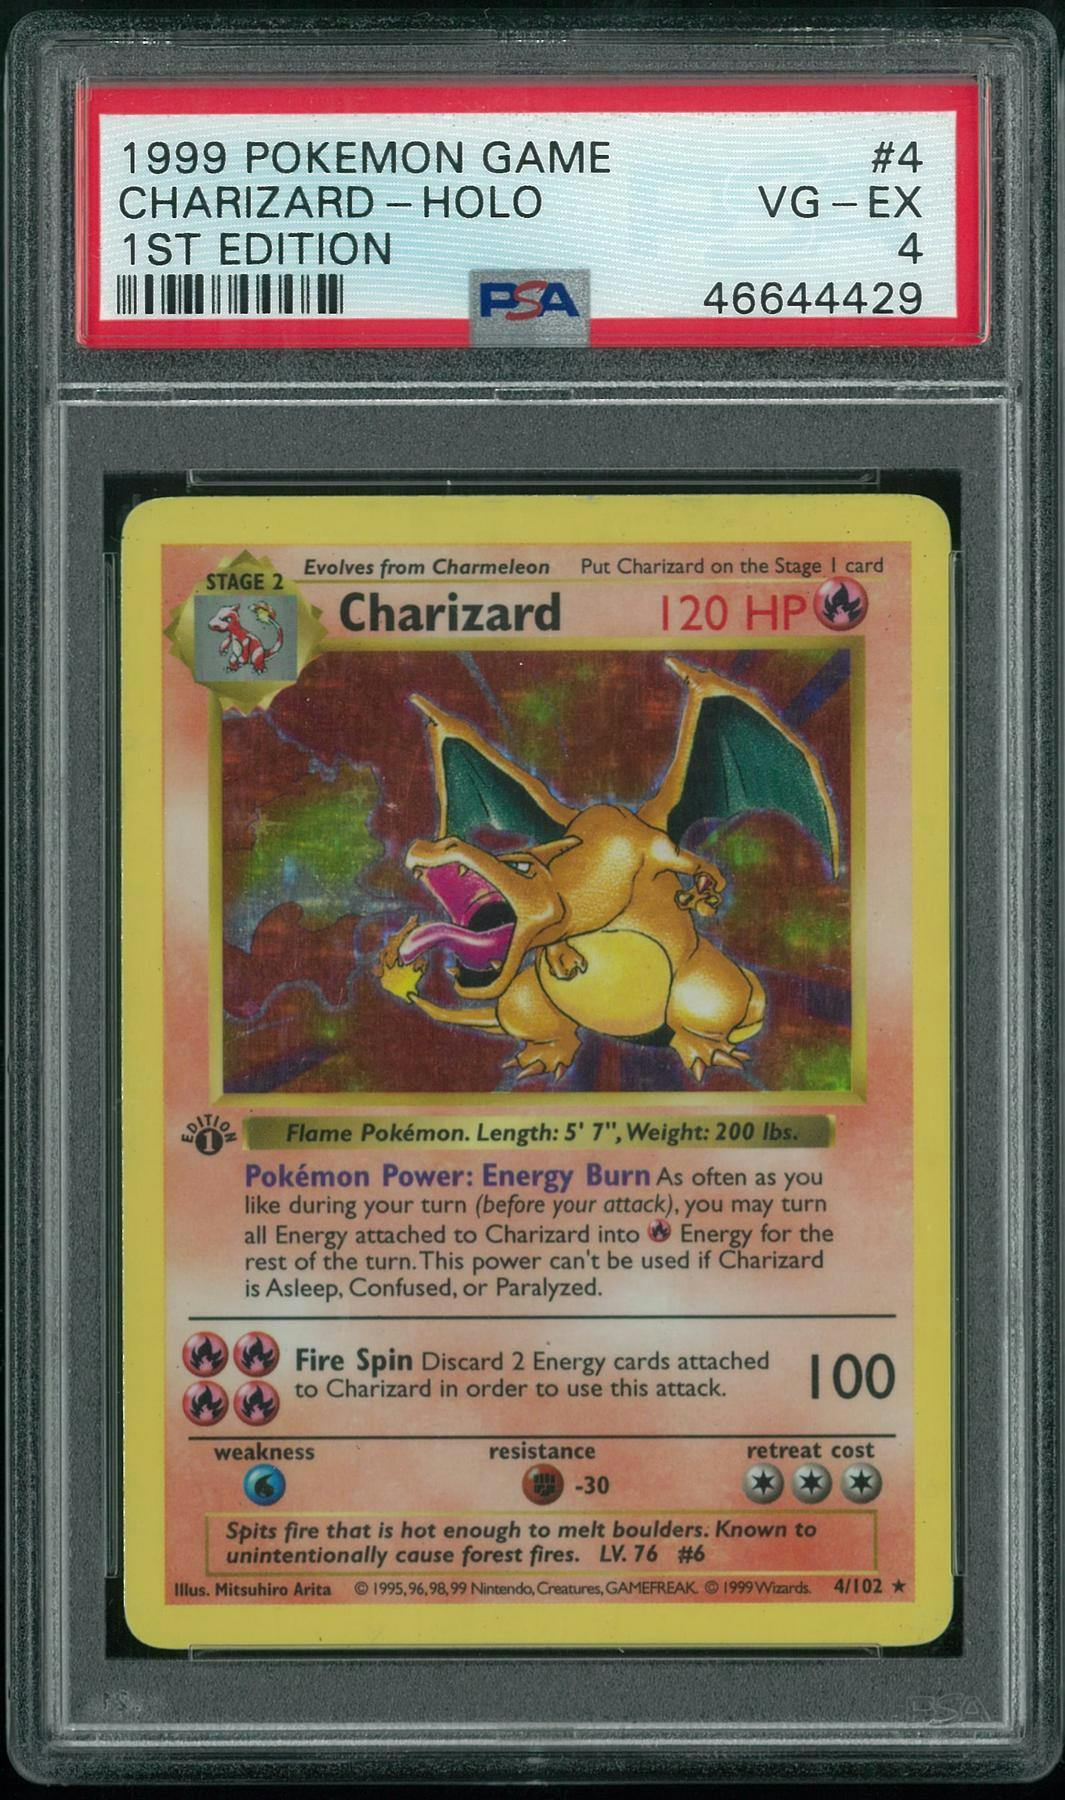 1999 Pokemon Base Set - Choose Your Card! - 1st Edition & Shadowless  Available!